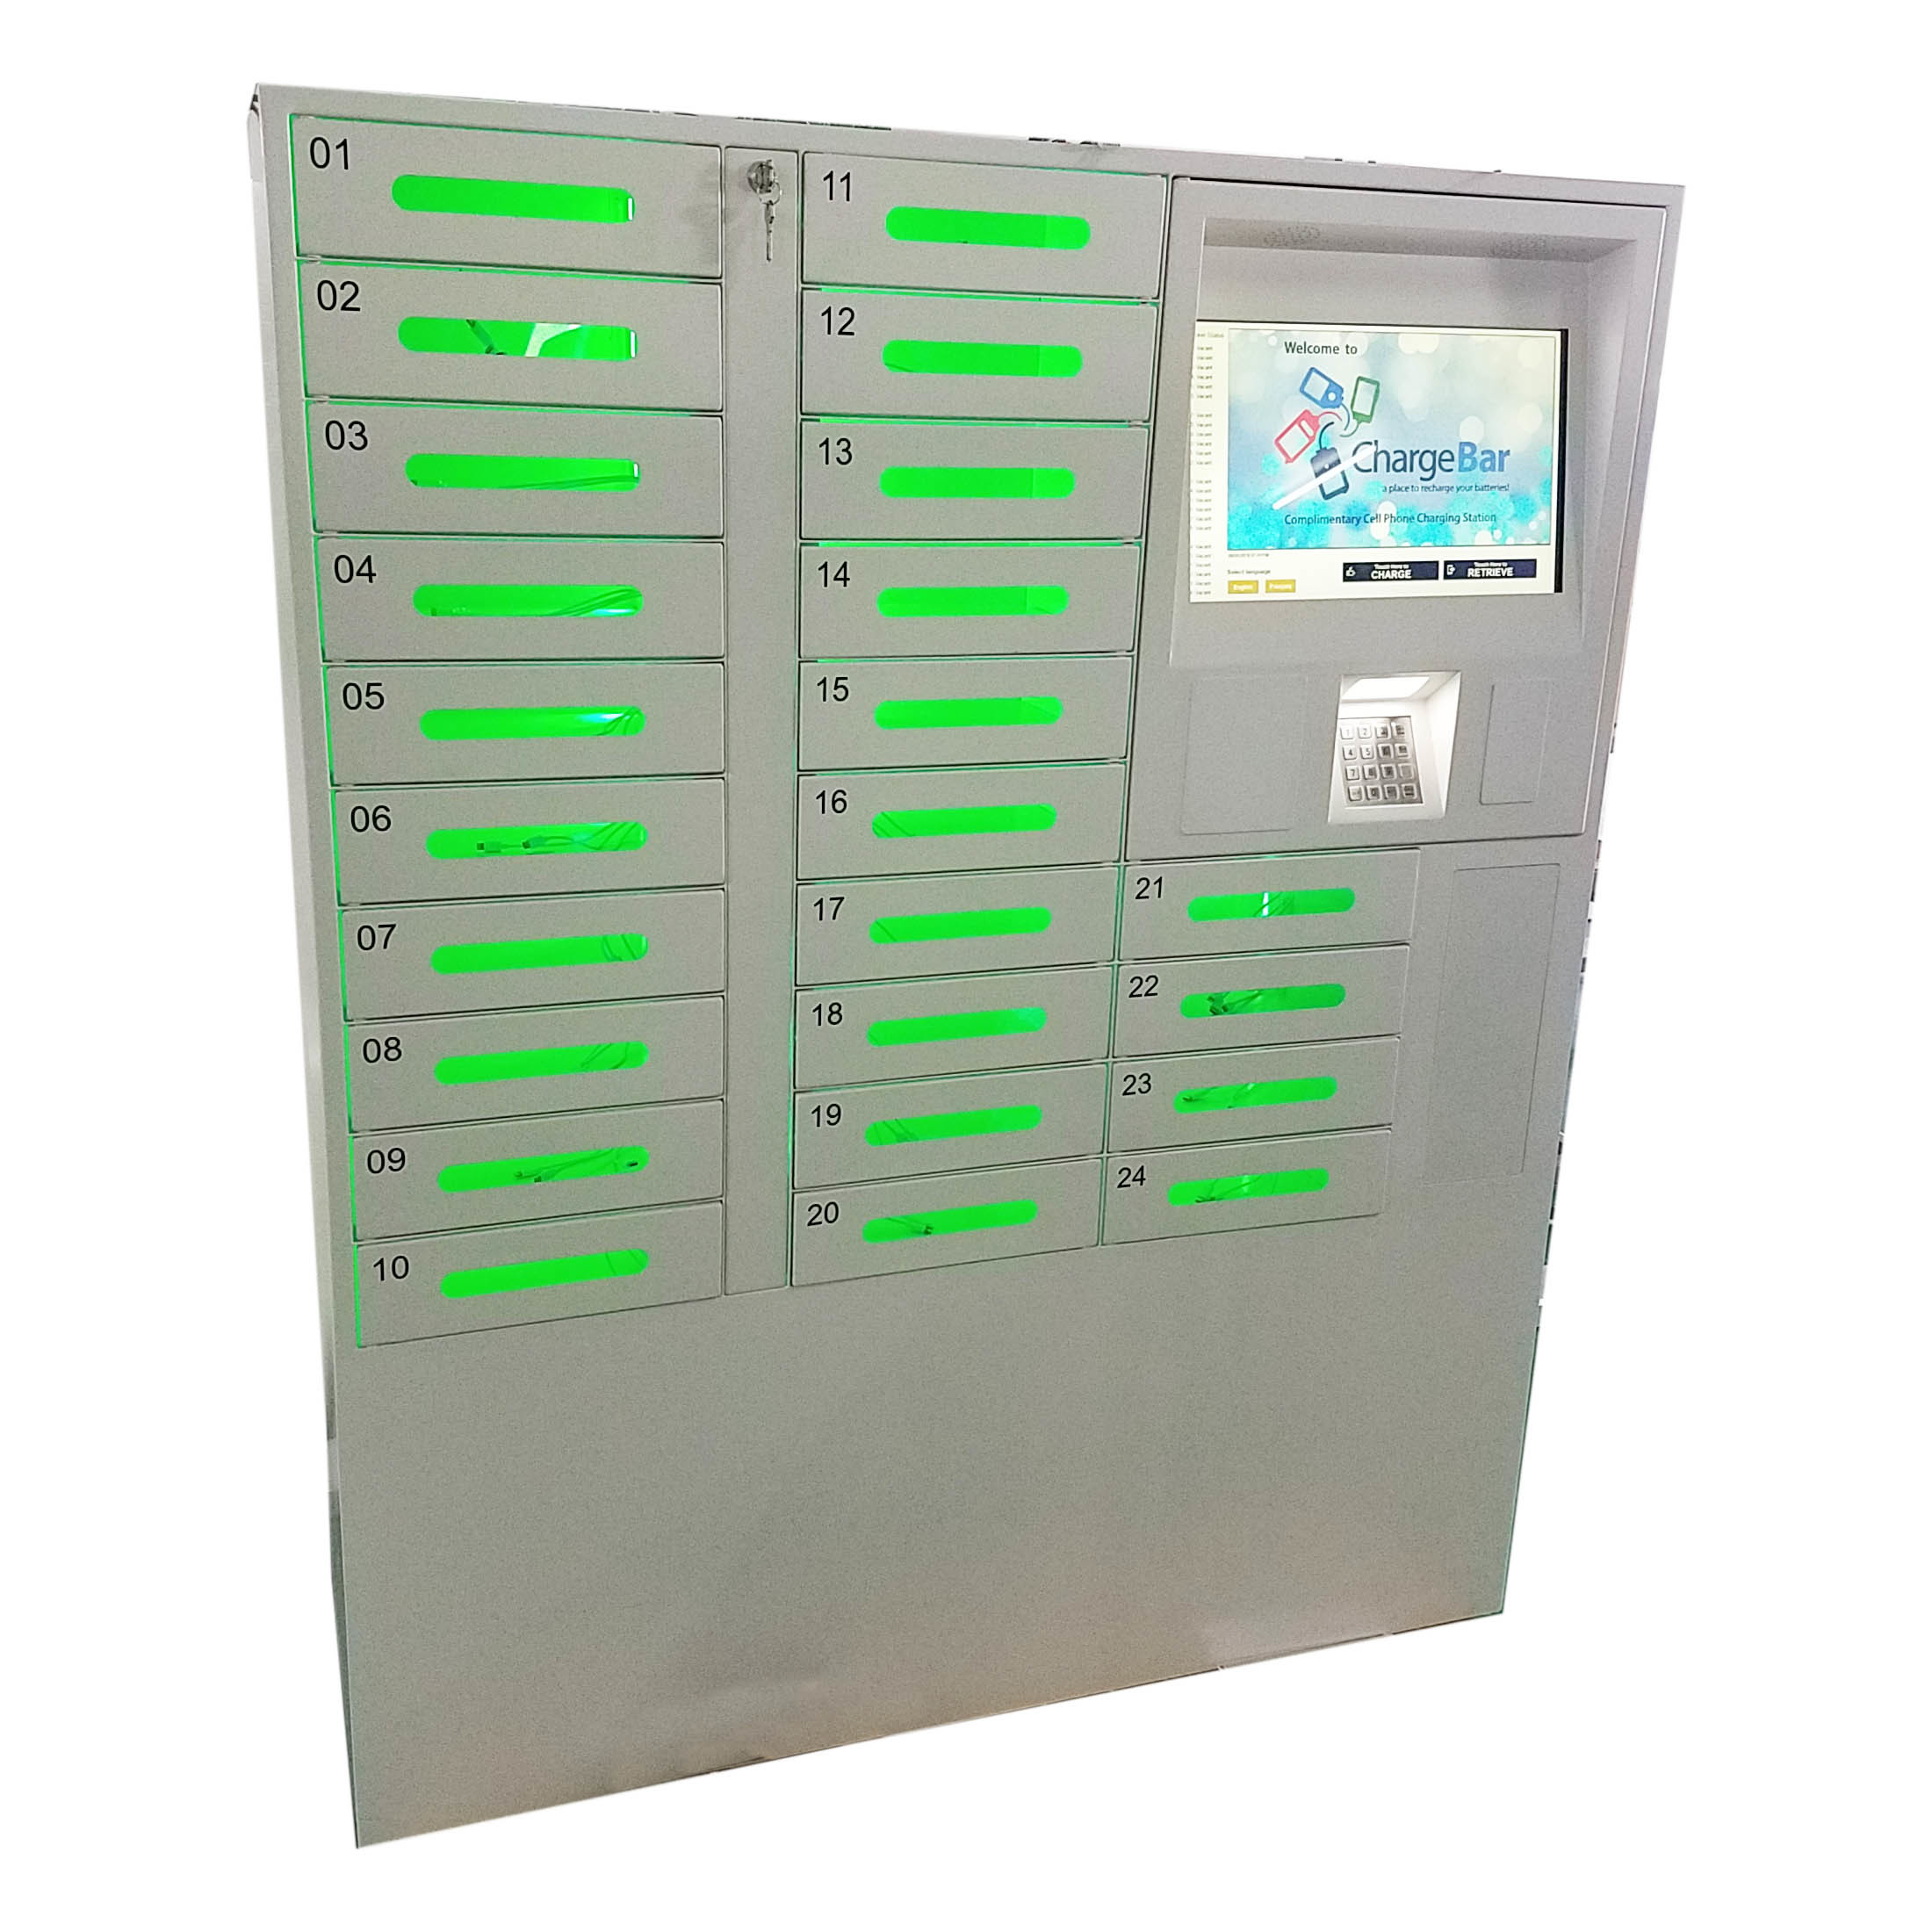  Customised Public Coin Operated Mobile Phone Charging Station Kiosk Multiple Doors Manufactures